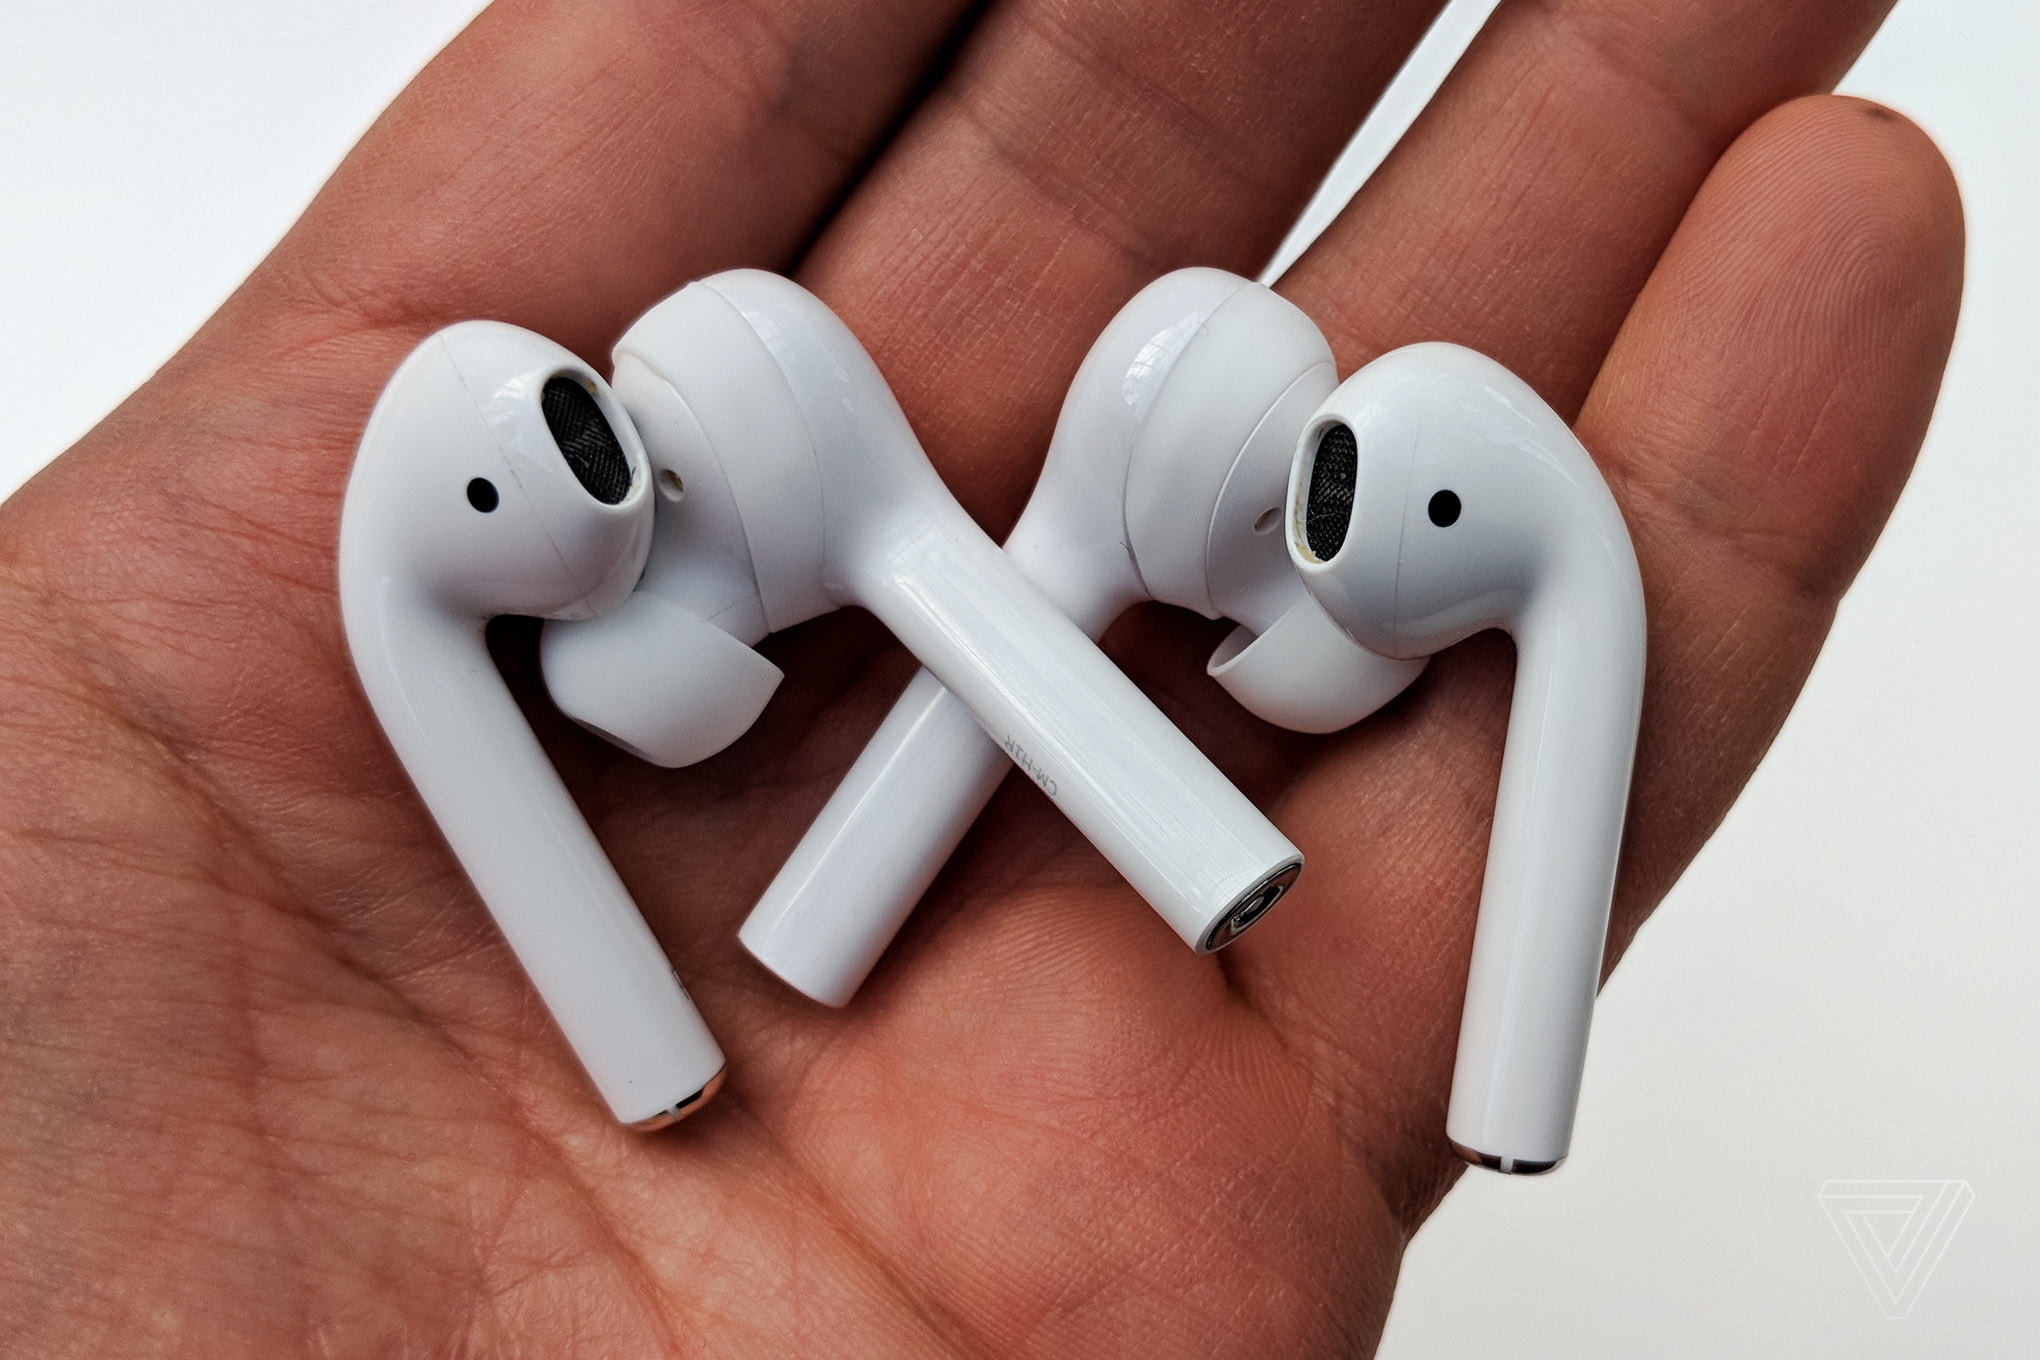 Сенсорные airpods. AIRPODS Huawei freebuds. Huawei freebuds AIRPODS 2. Наушники freebuds 2. Huawei freebuds 3.